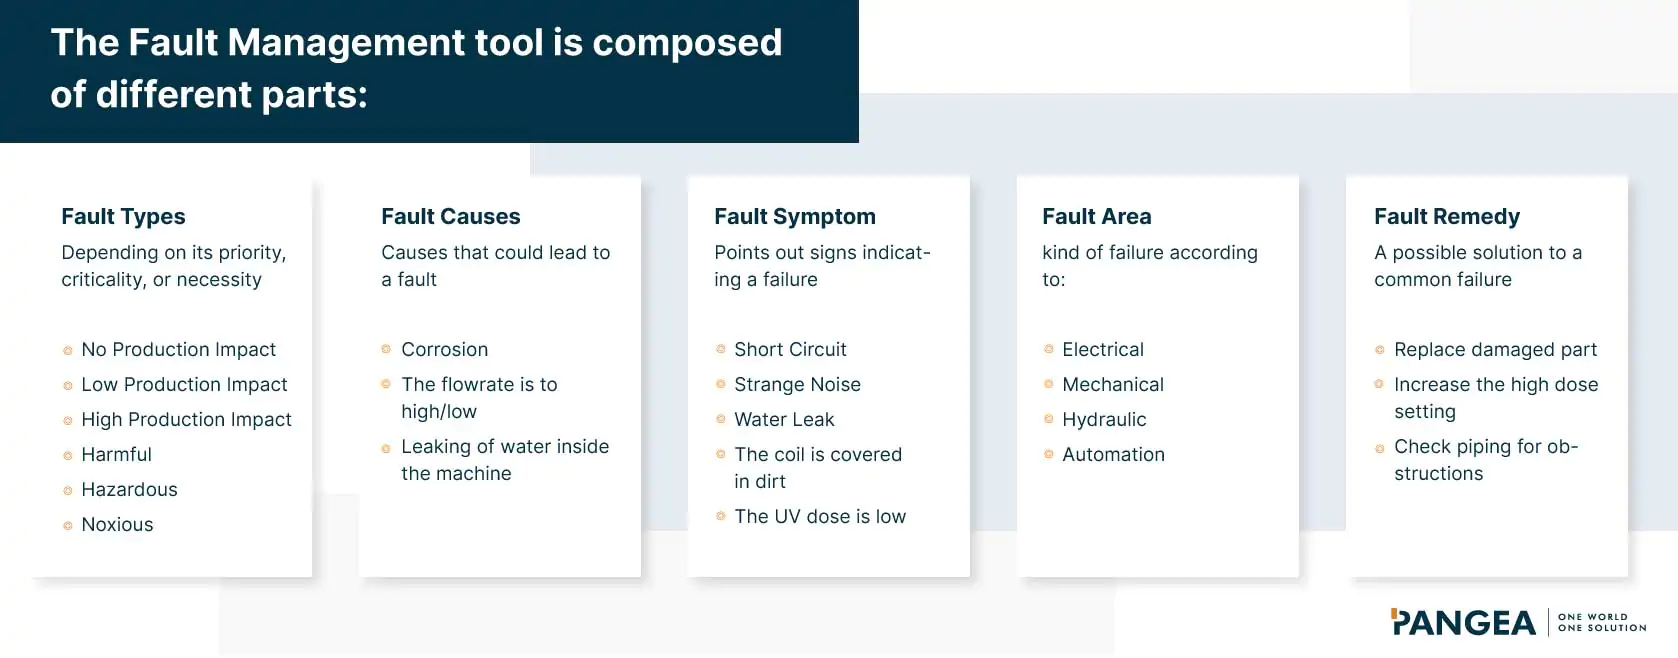 The Fault Management tool parts